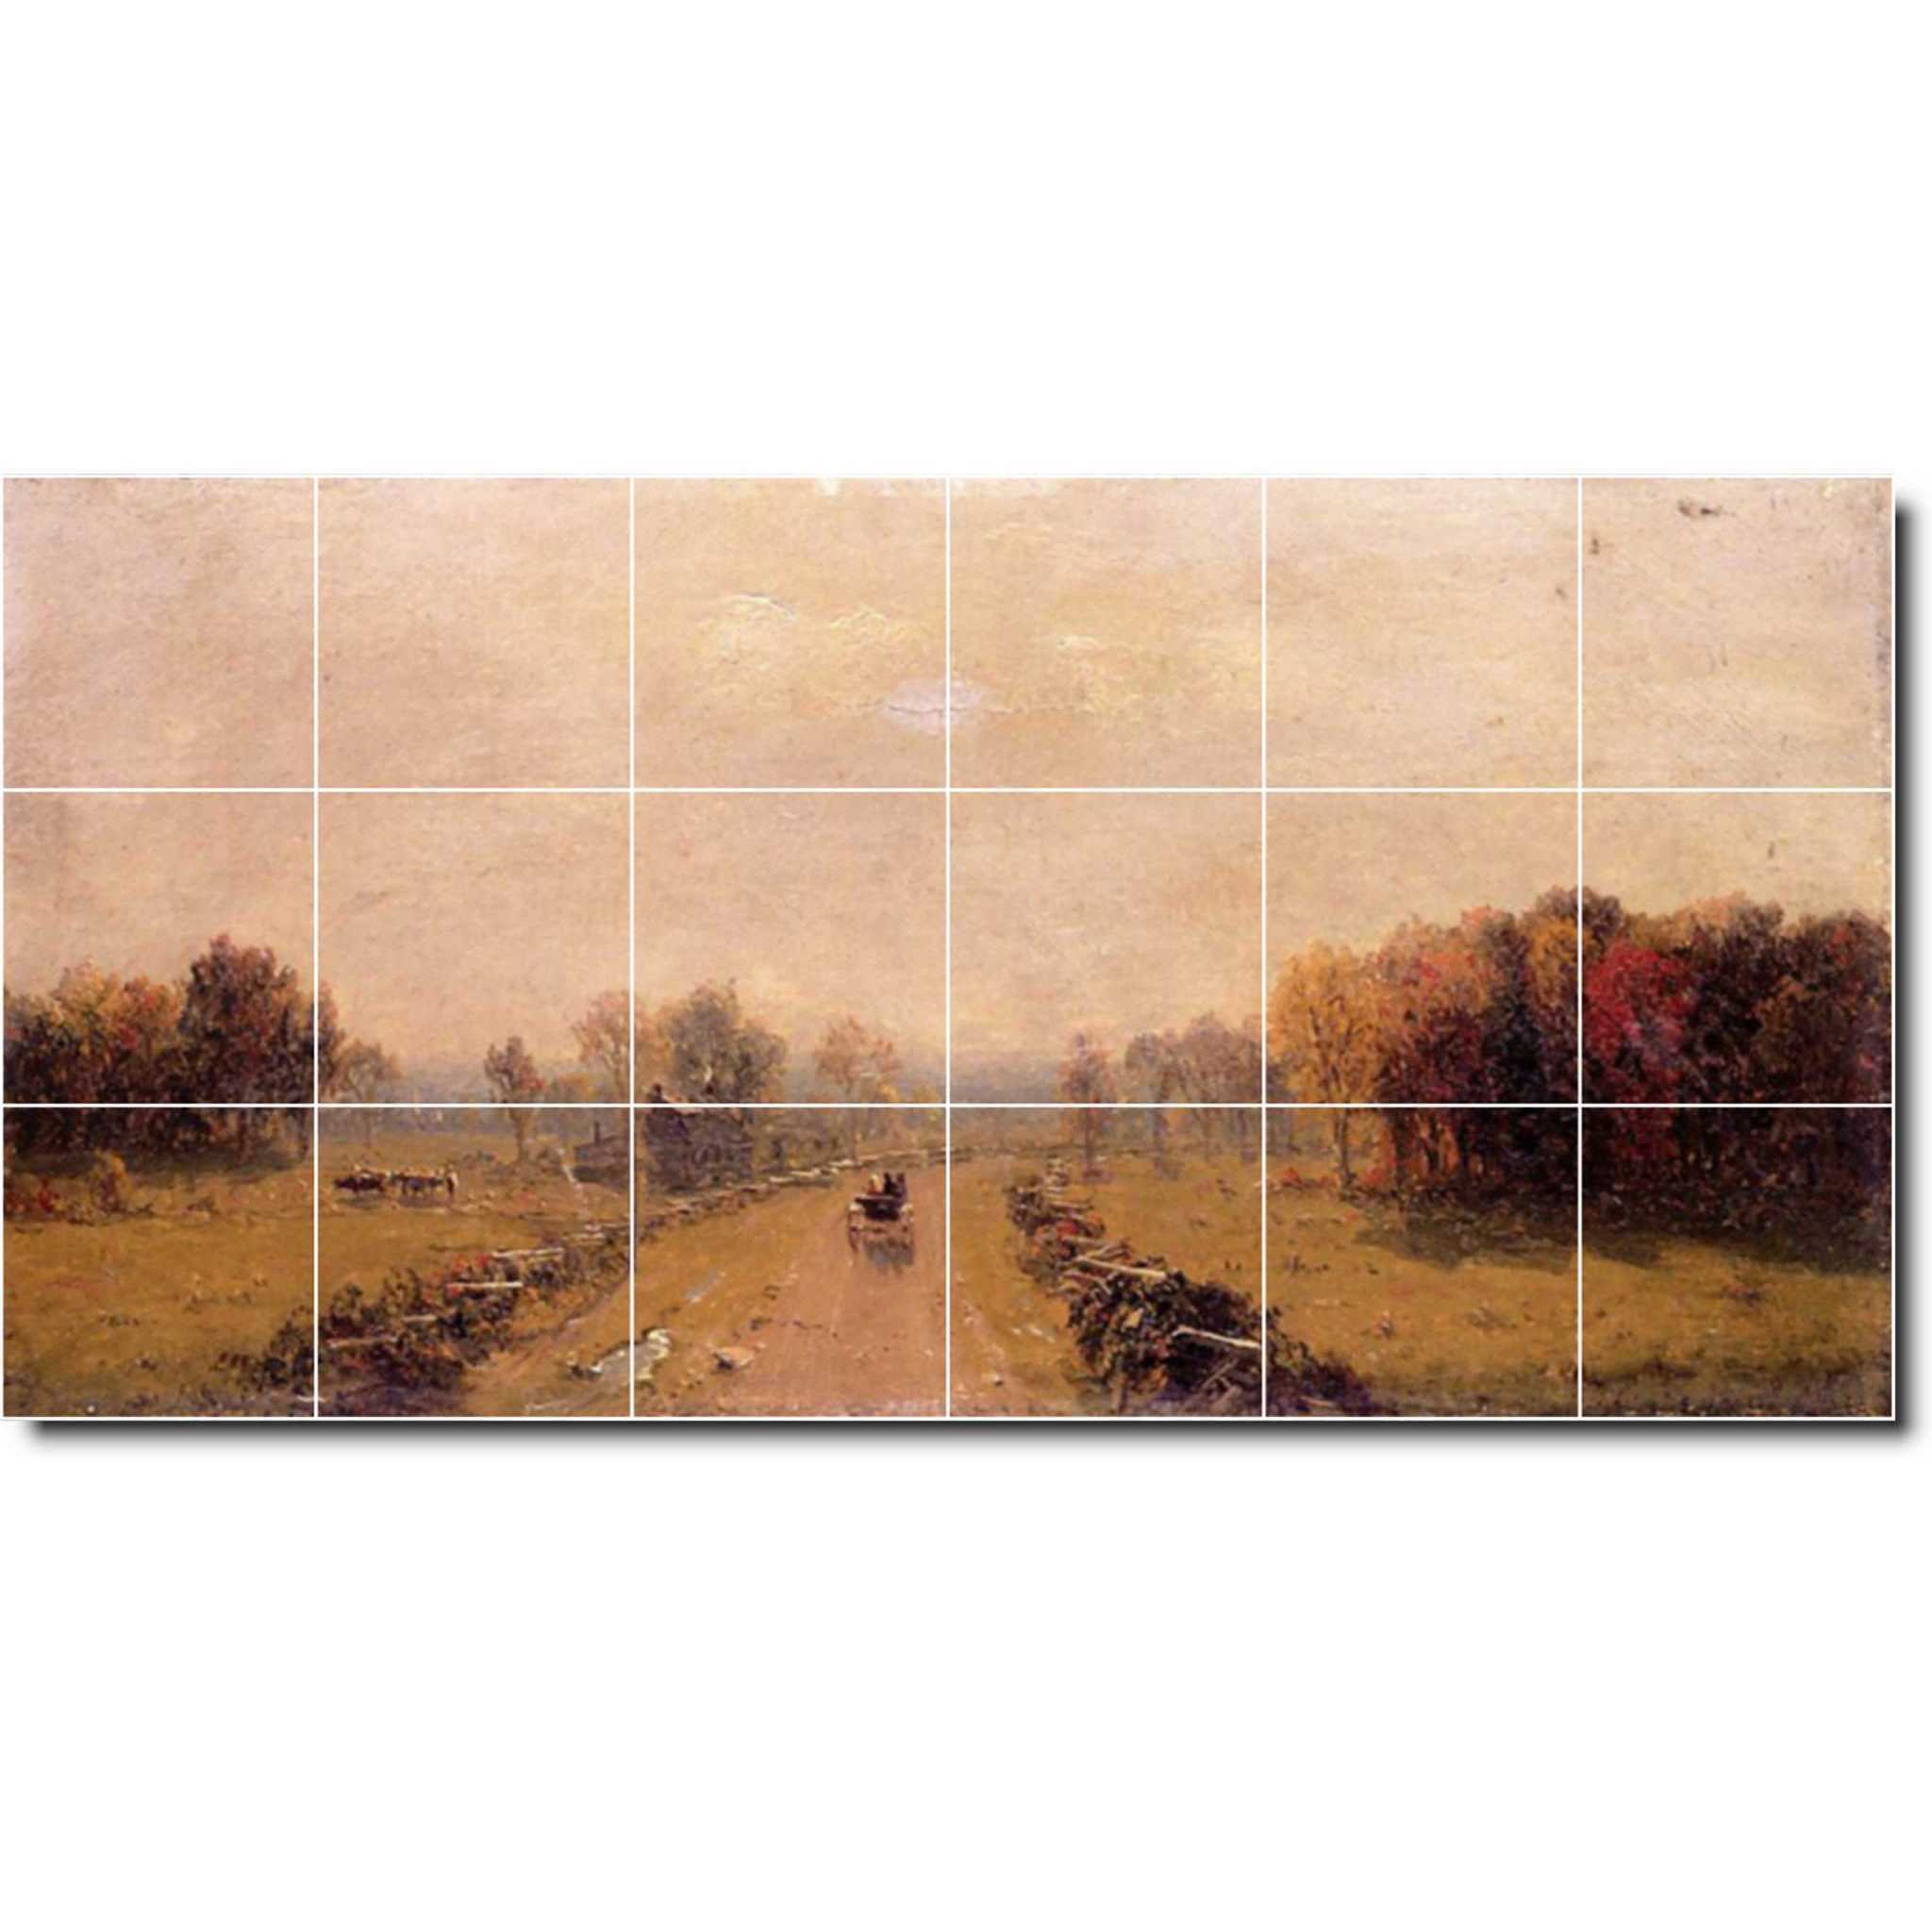 sanford gifford country painting ceramic tile mural p03551